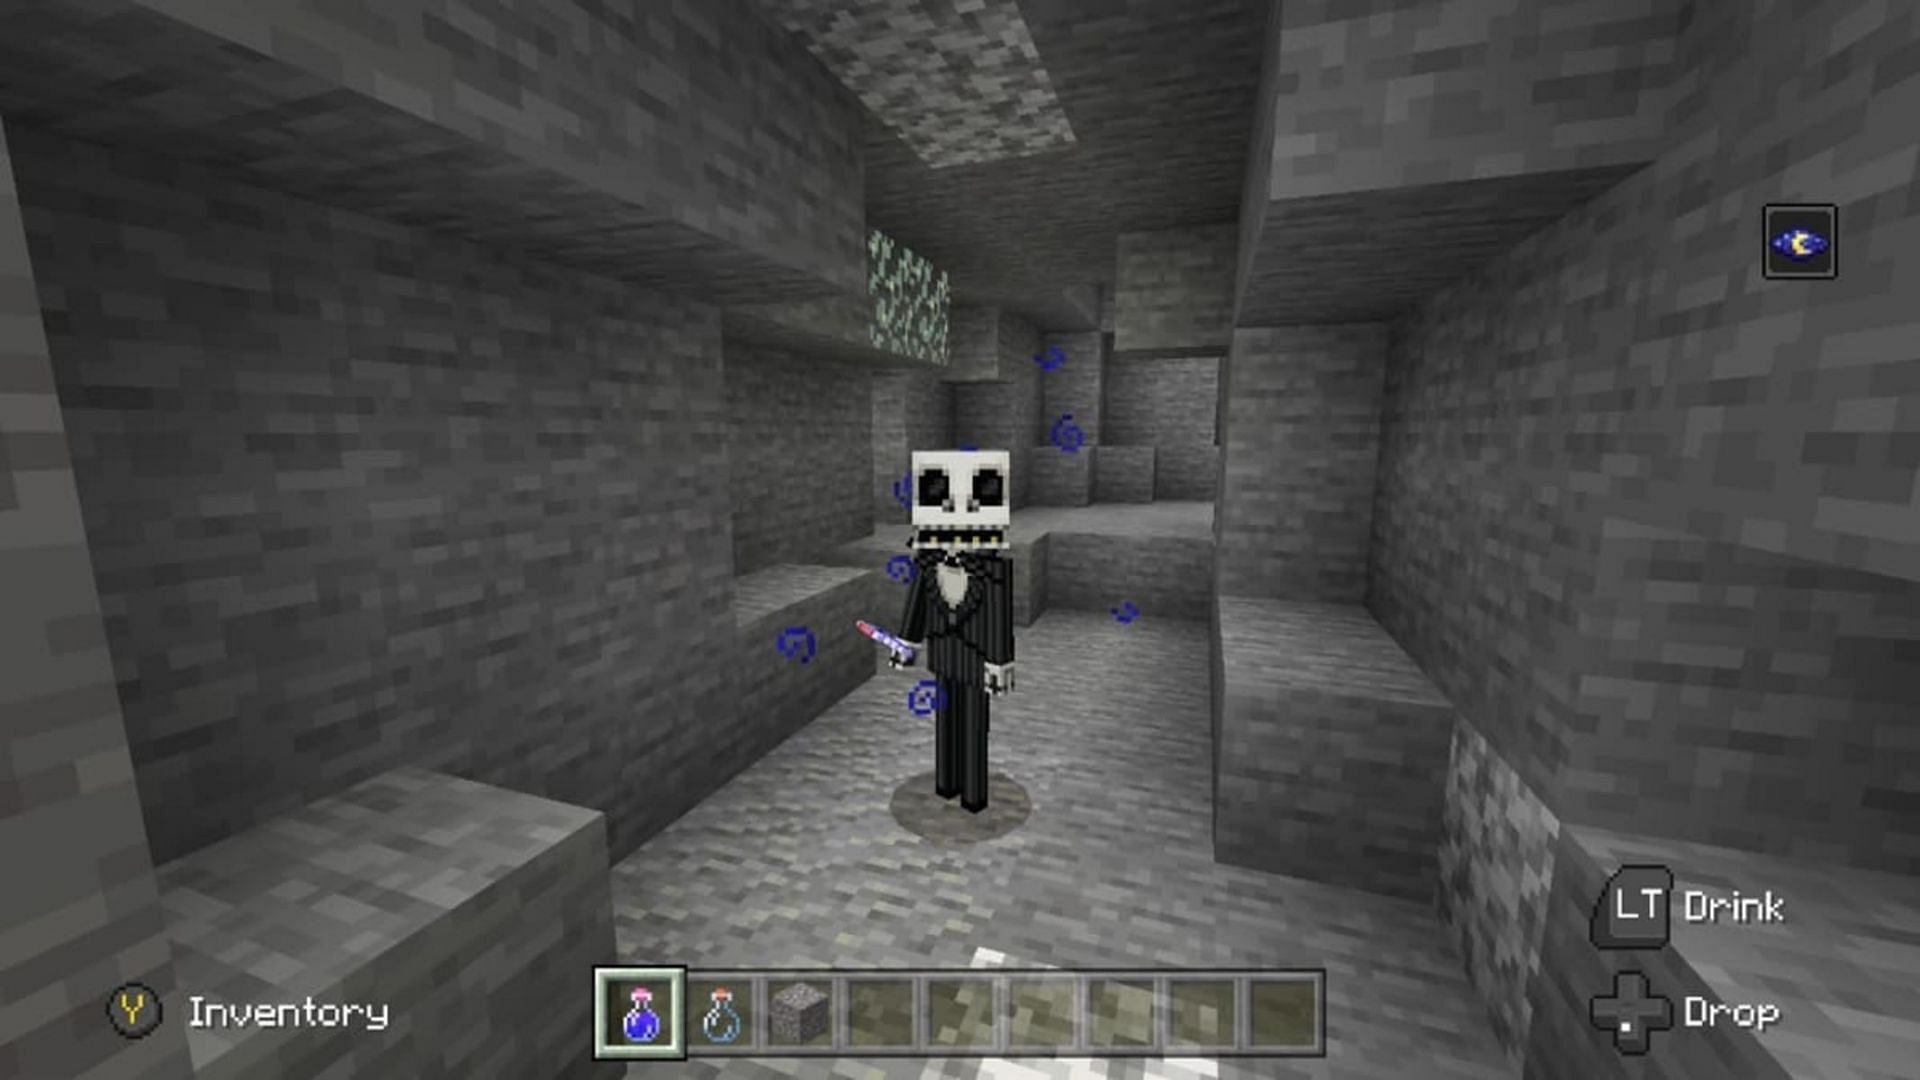 A player is bestowed night vision, allowing them to see inside a dark cave (Image via Mojang)